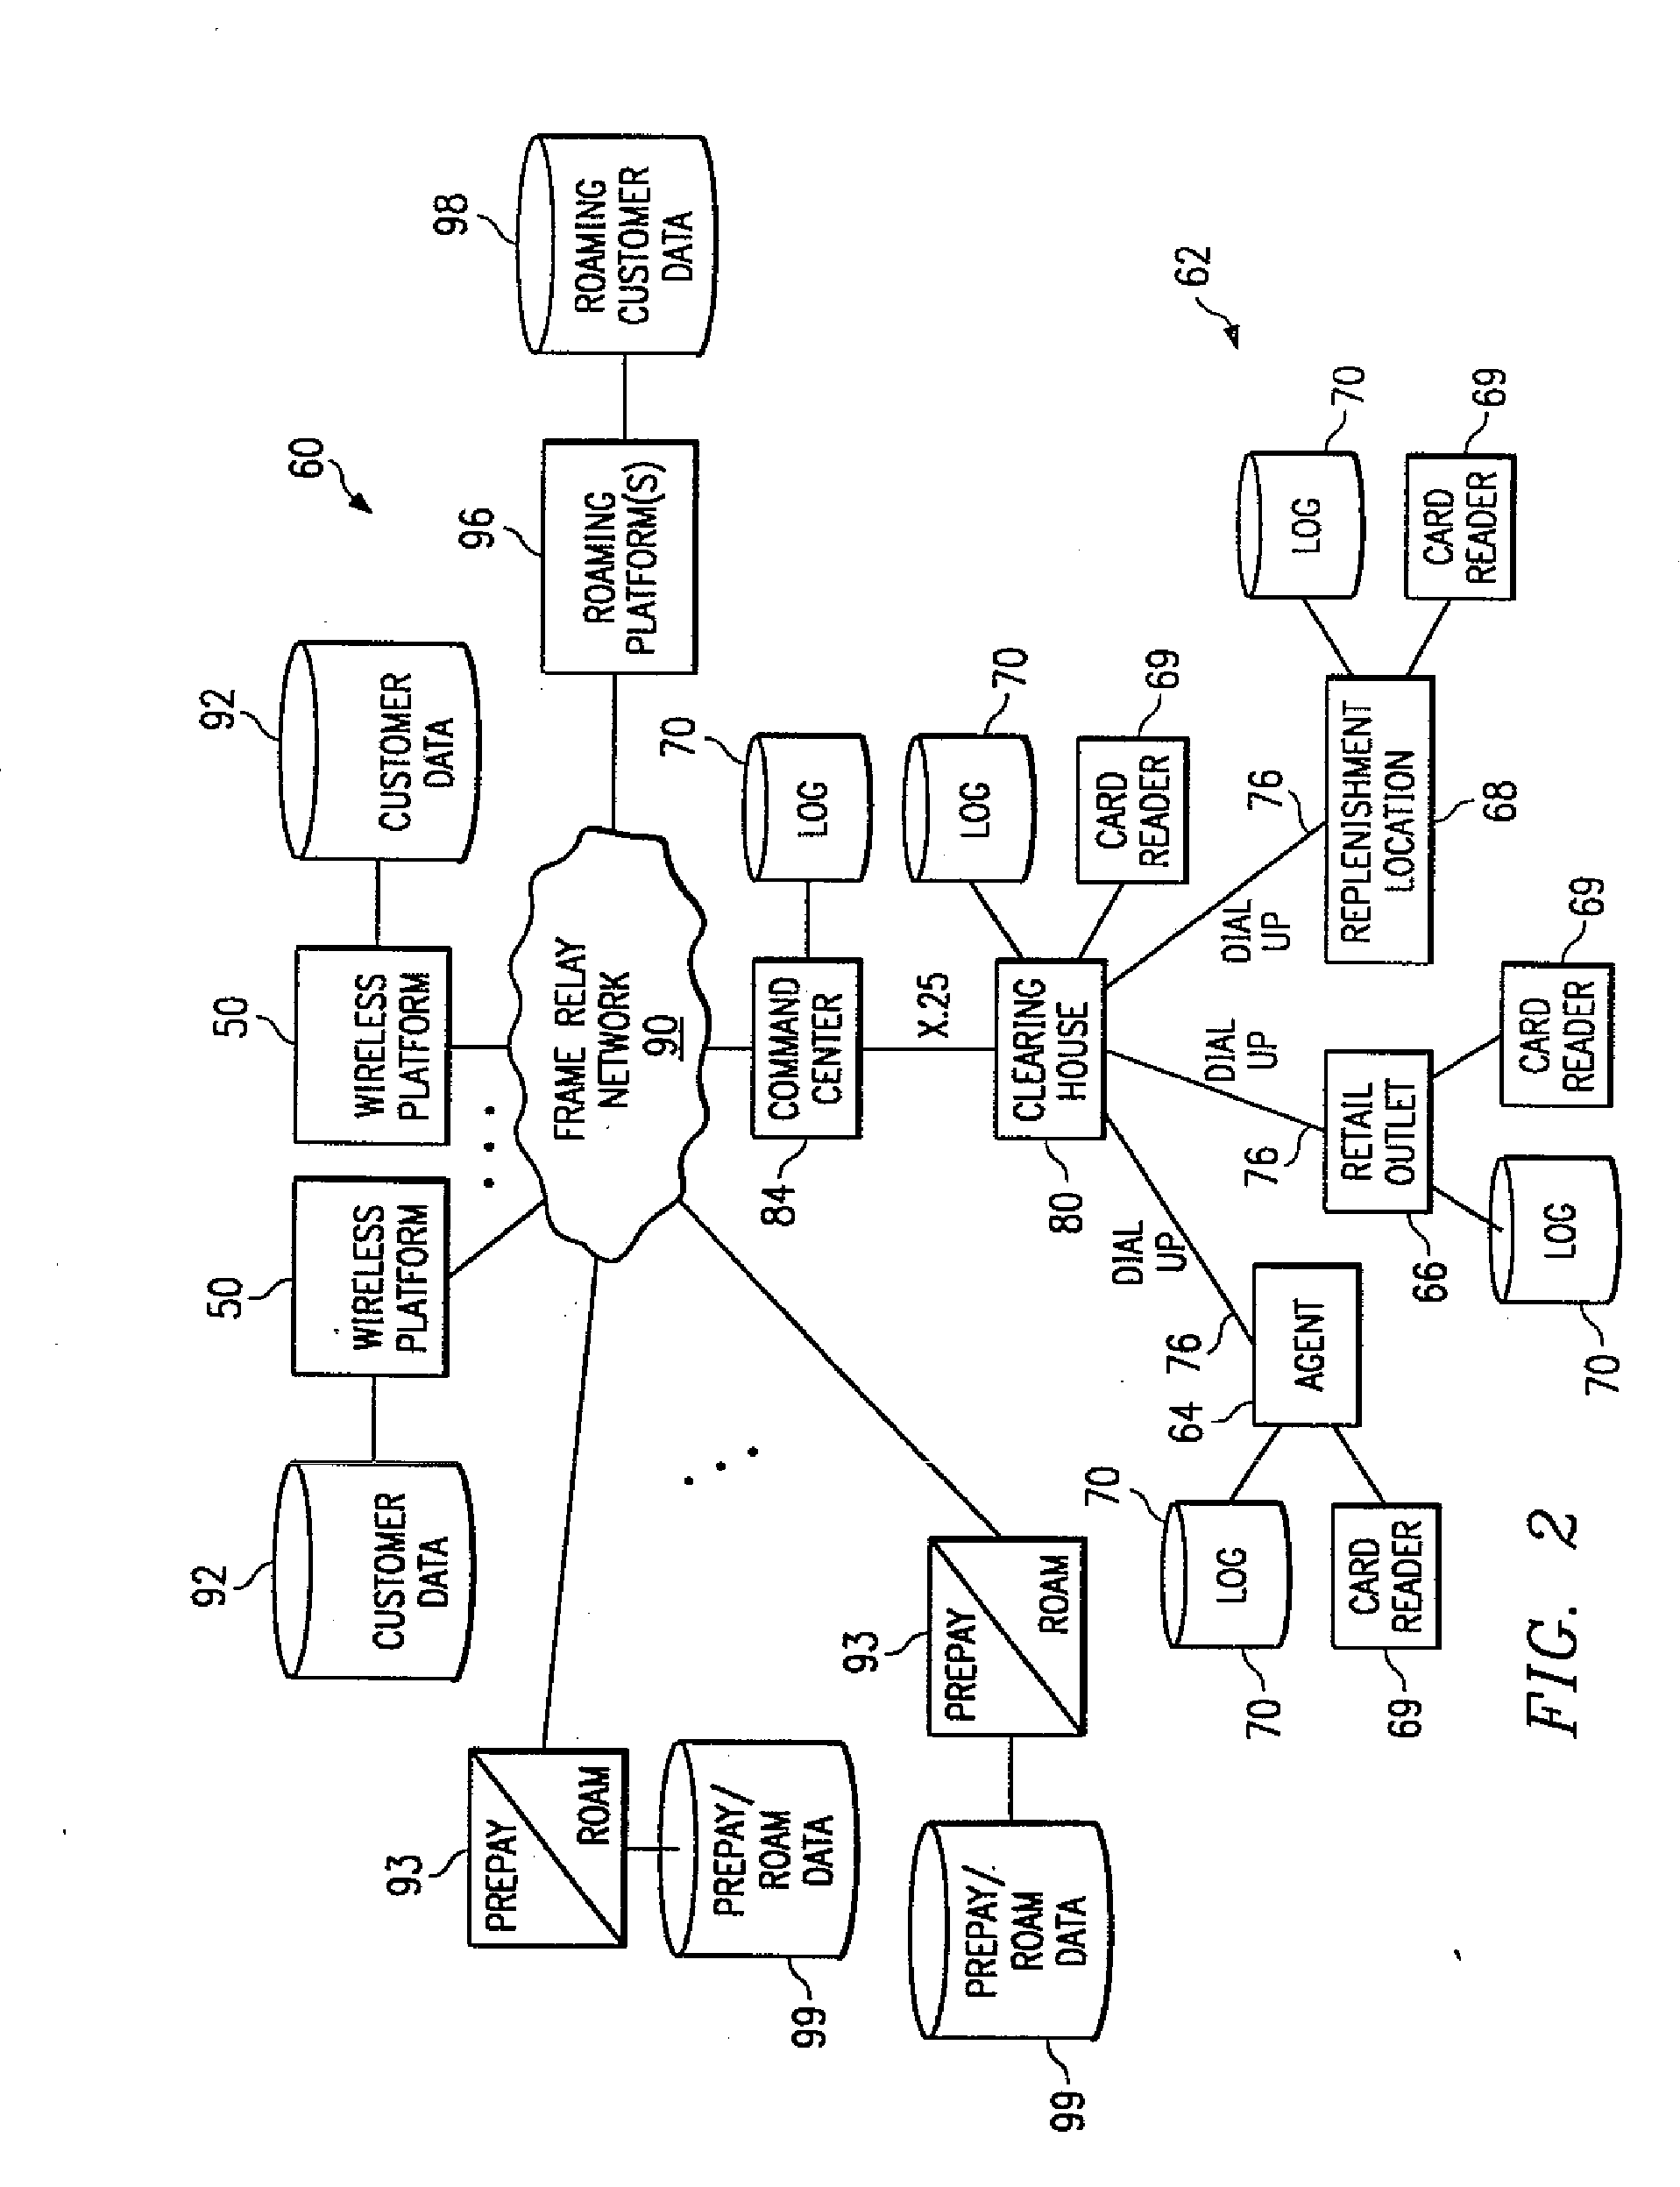 System and method of real-time call processing and billing